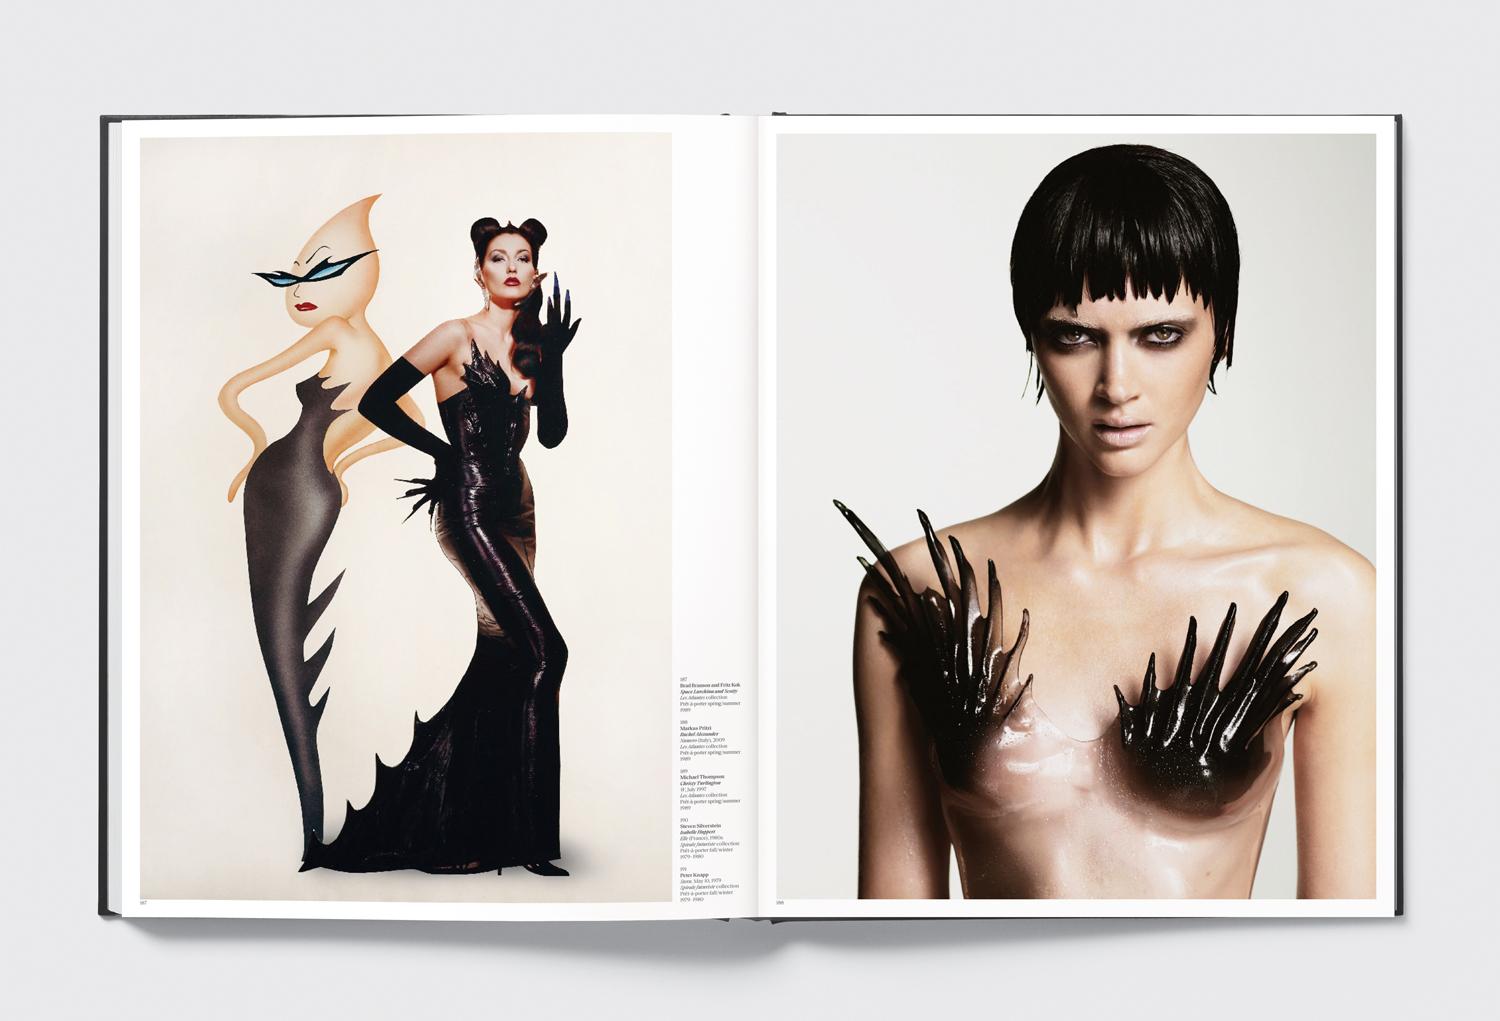 Paper Thierry Mugler: Couturissime